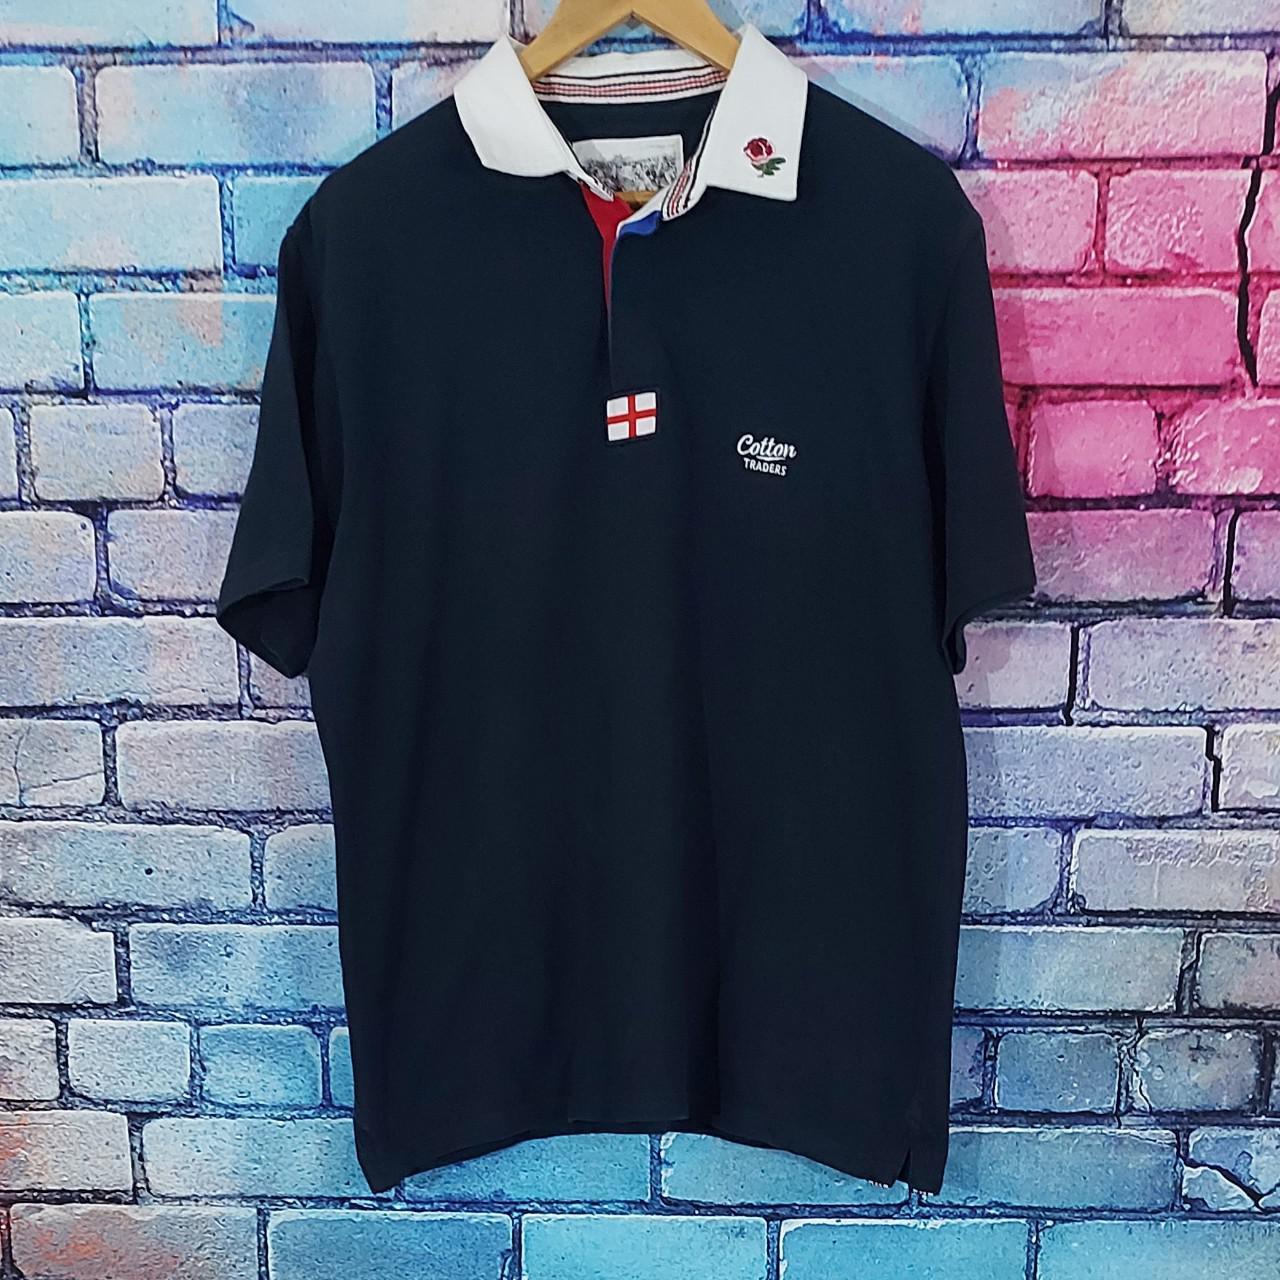 Cotton Traders Classics England Rugby Shirt. Size L.... - Depop